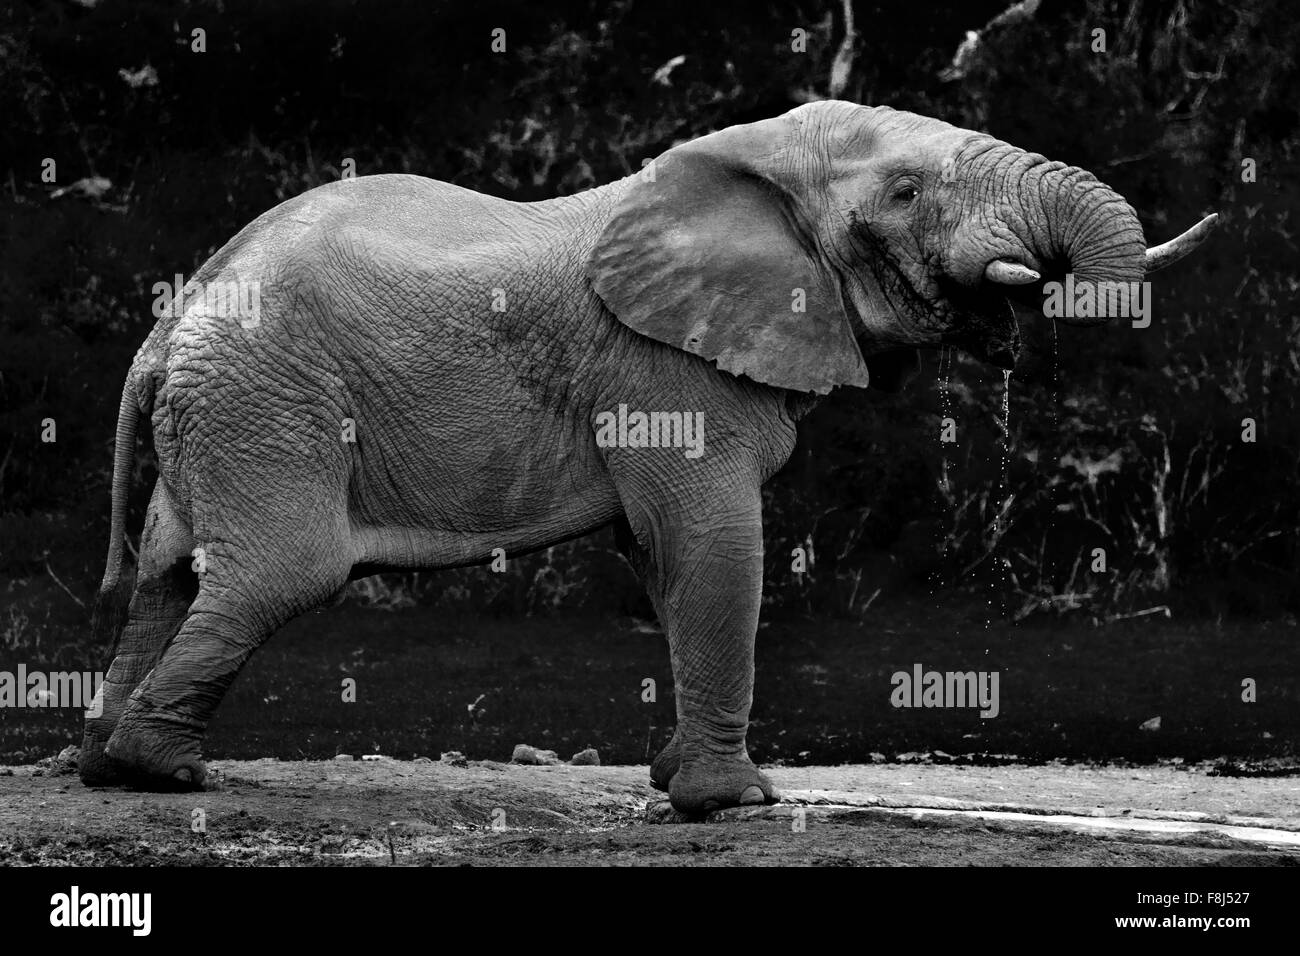 Elephant drinking water in a safari park in South Africa. Stock Photo